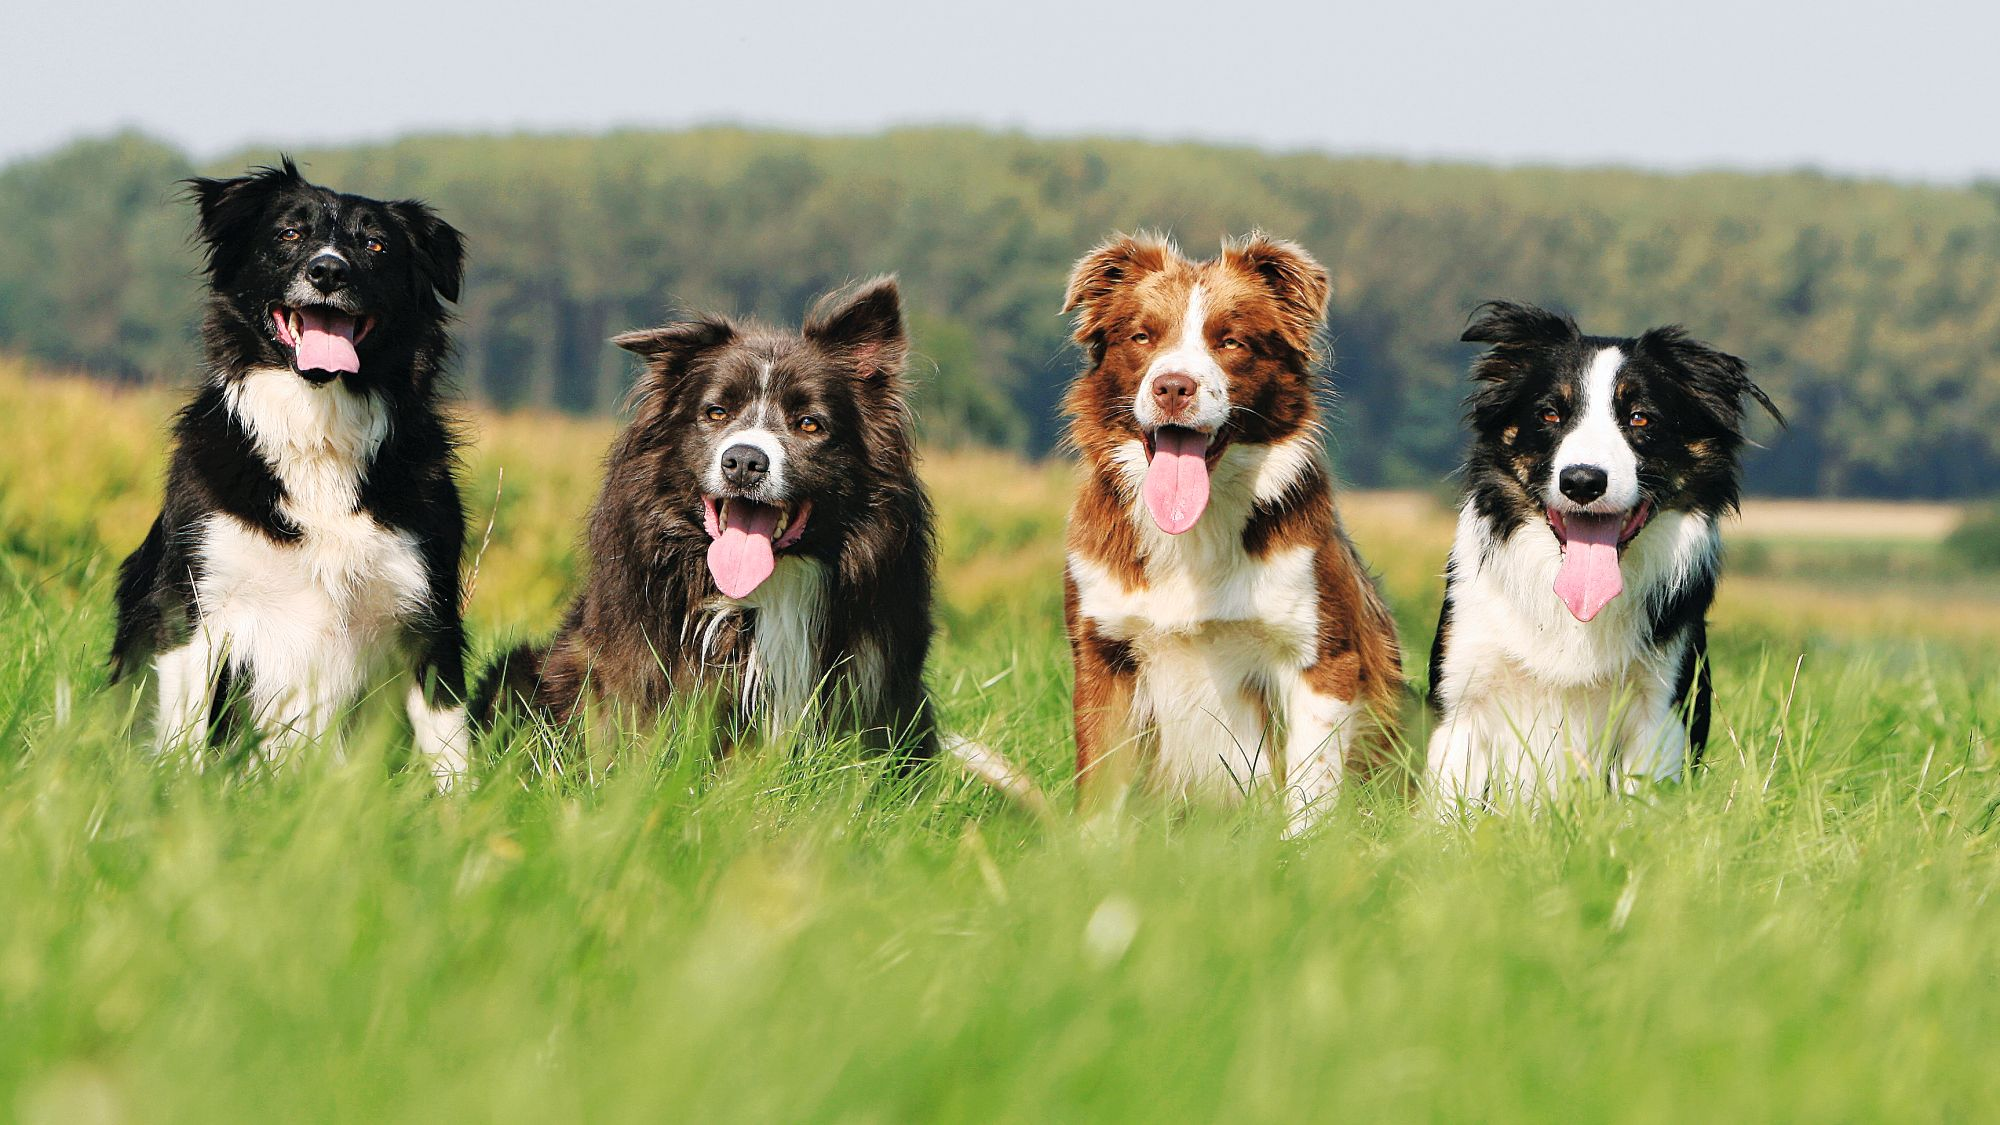 Four Border Collies sat in a row in a grassy field